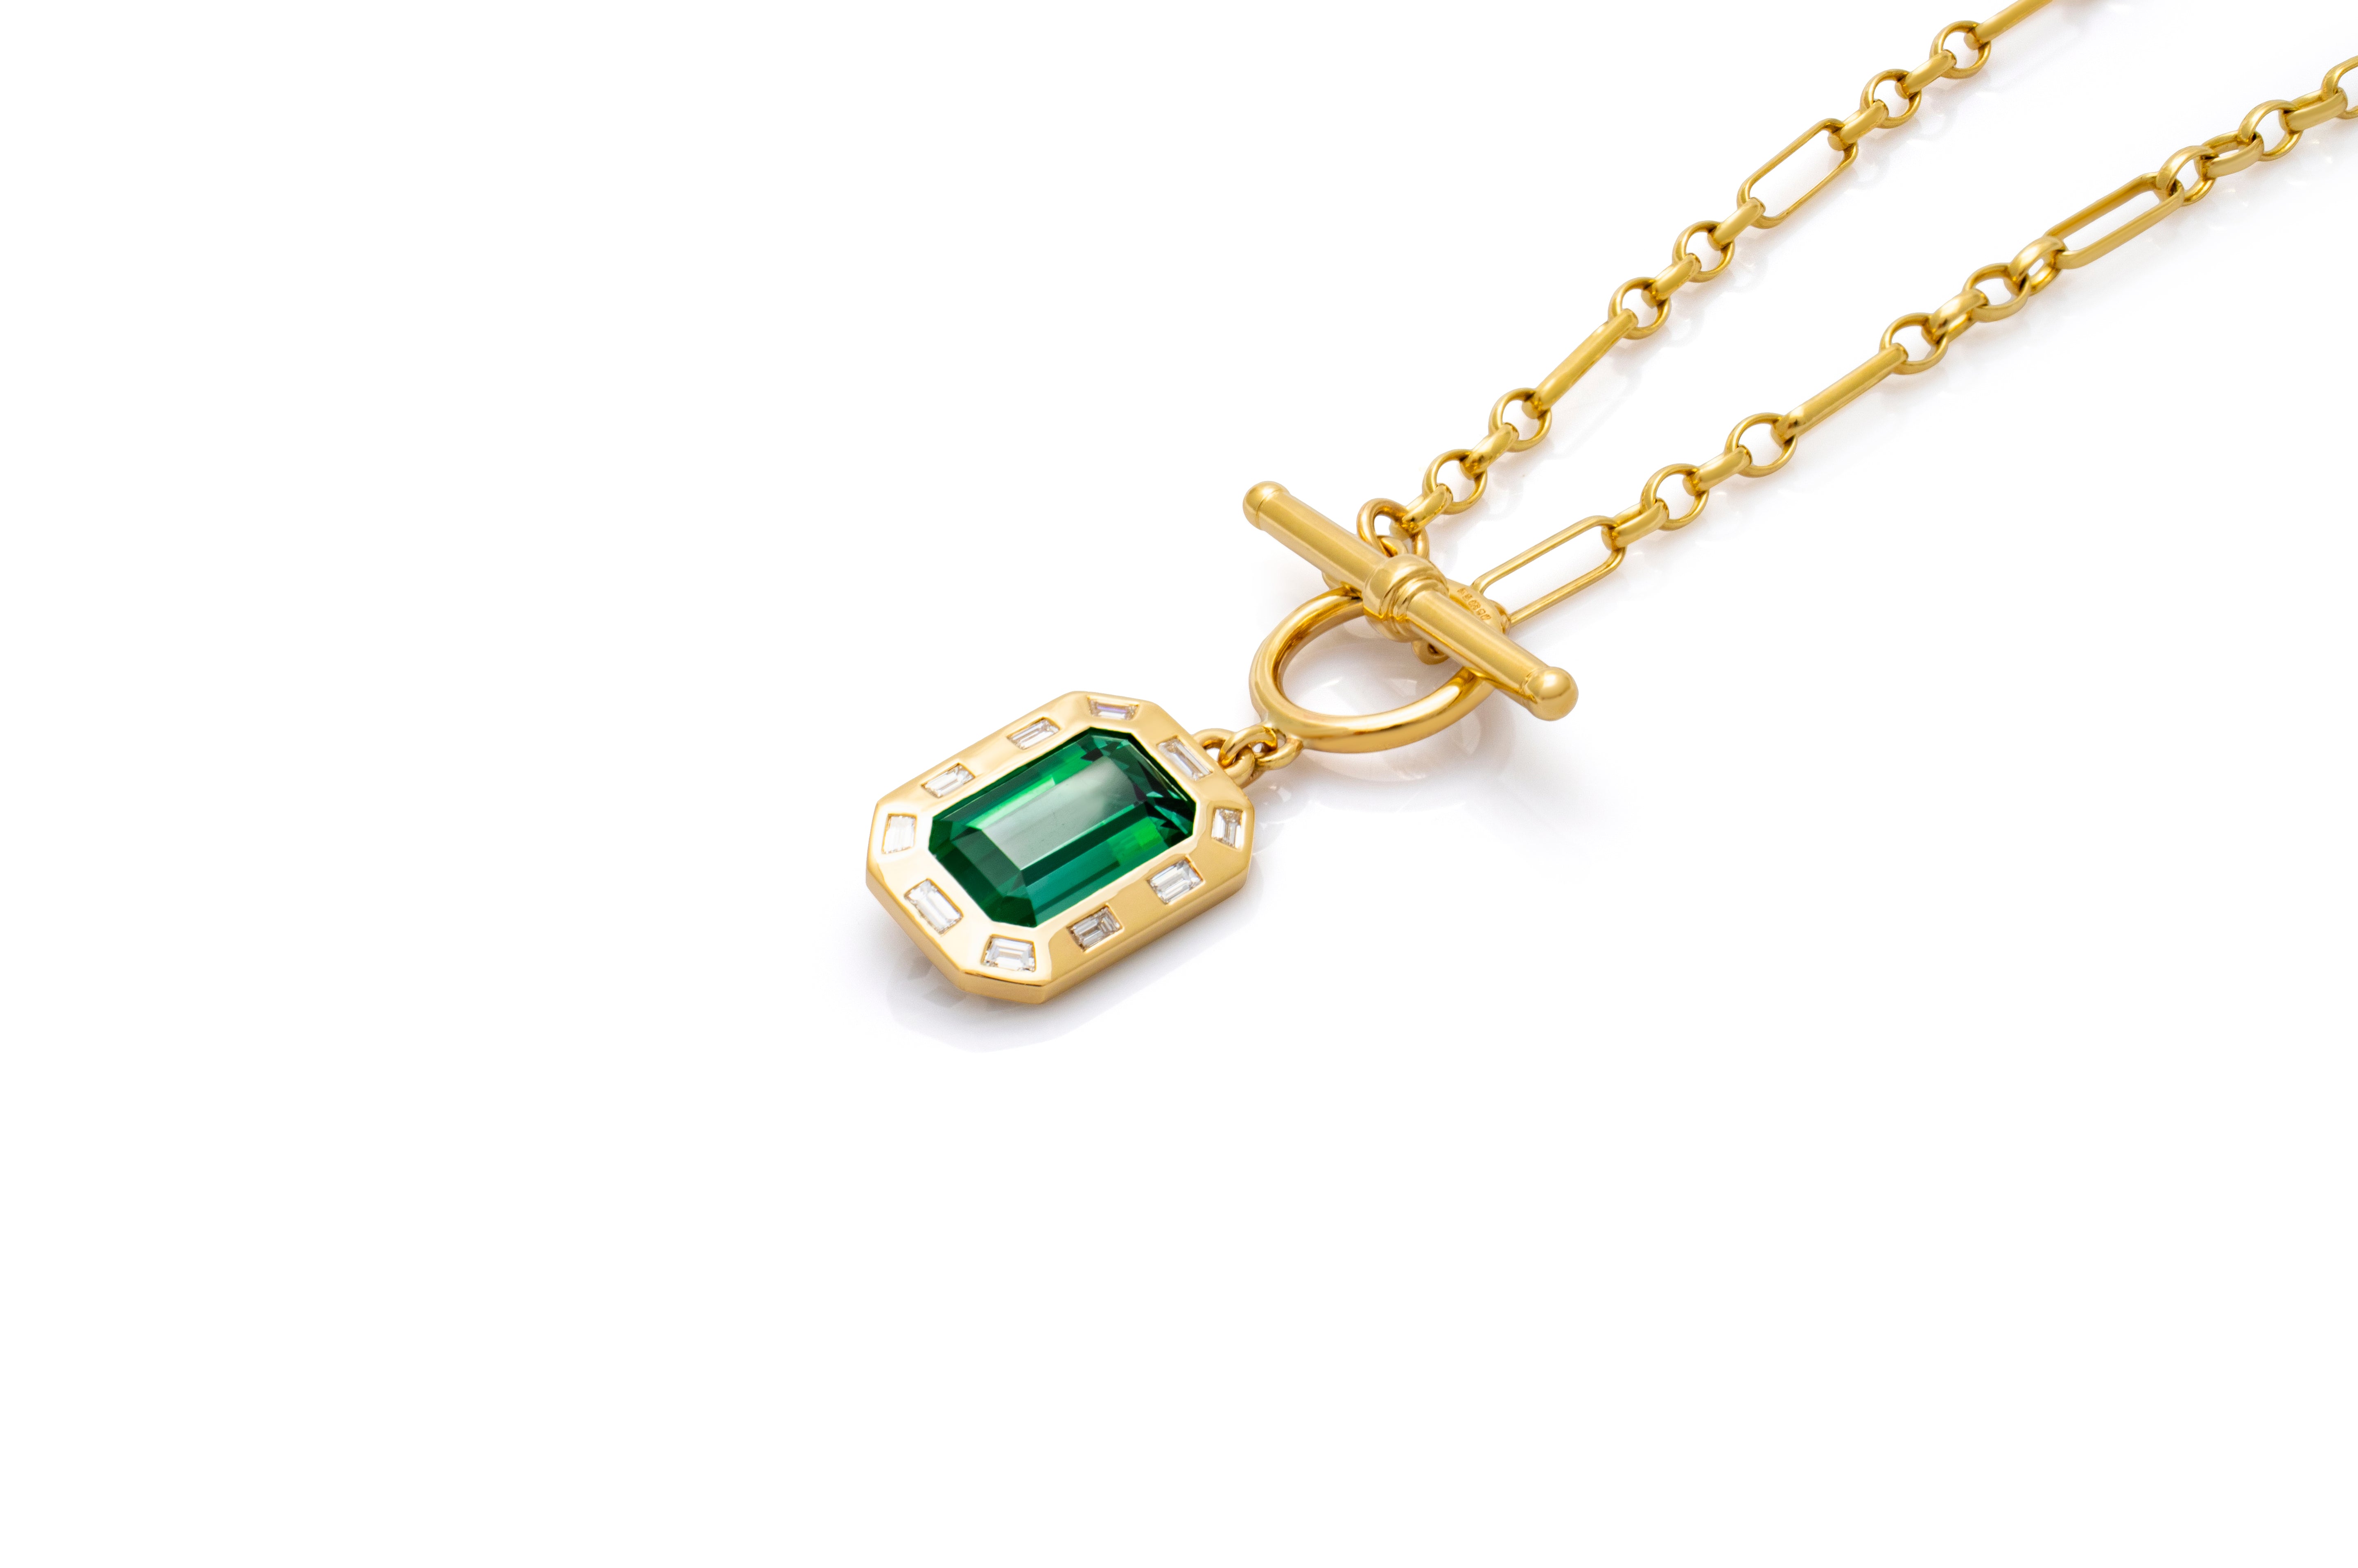 Green Tourmaline T-bar necklace. Serena Ansell Jewellery. Gemstone t-bar necklace. 